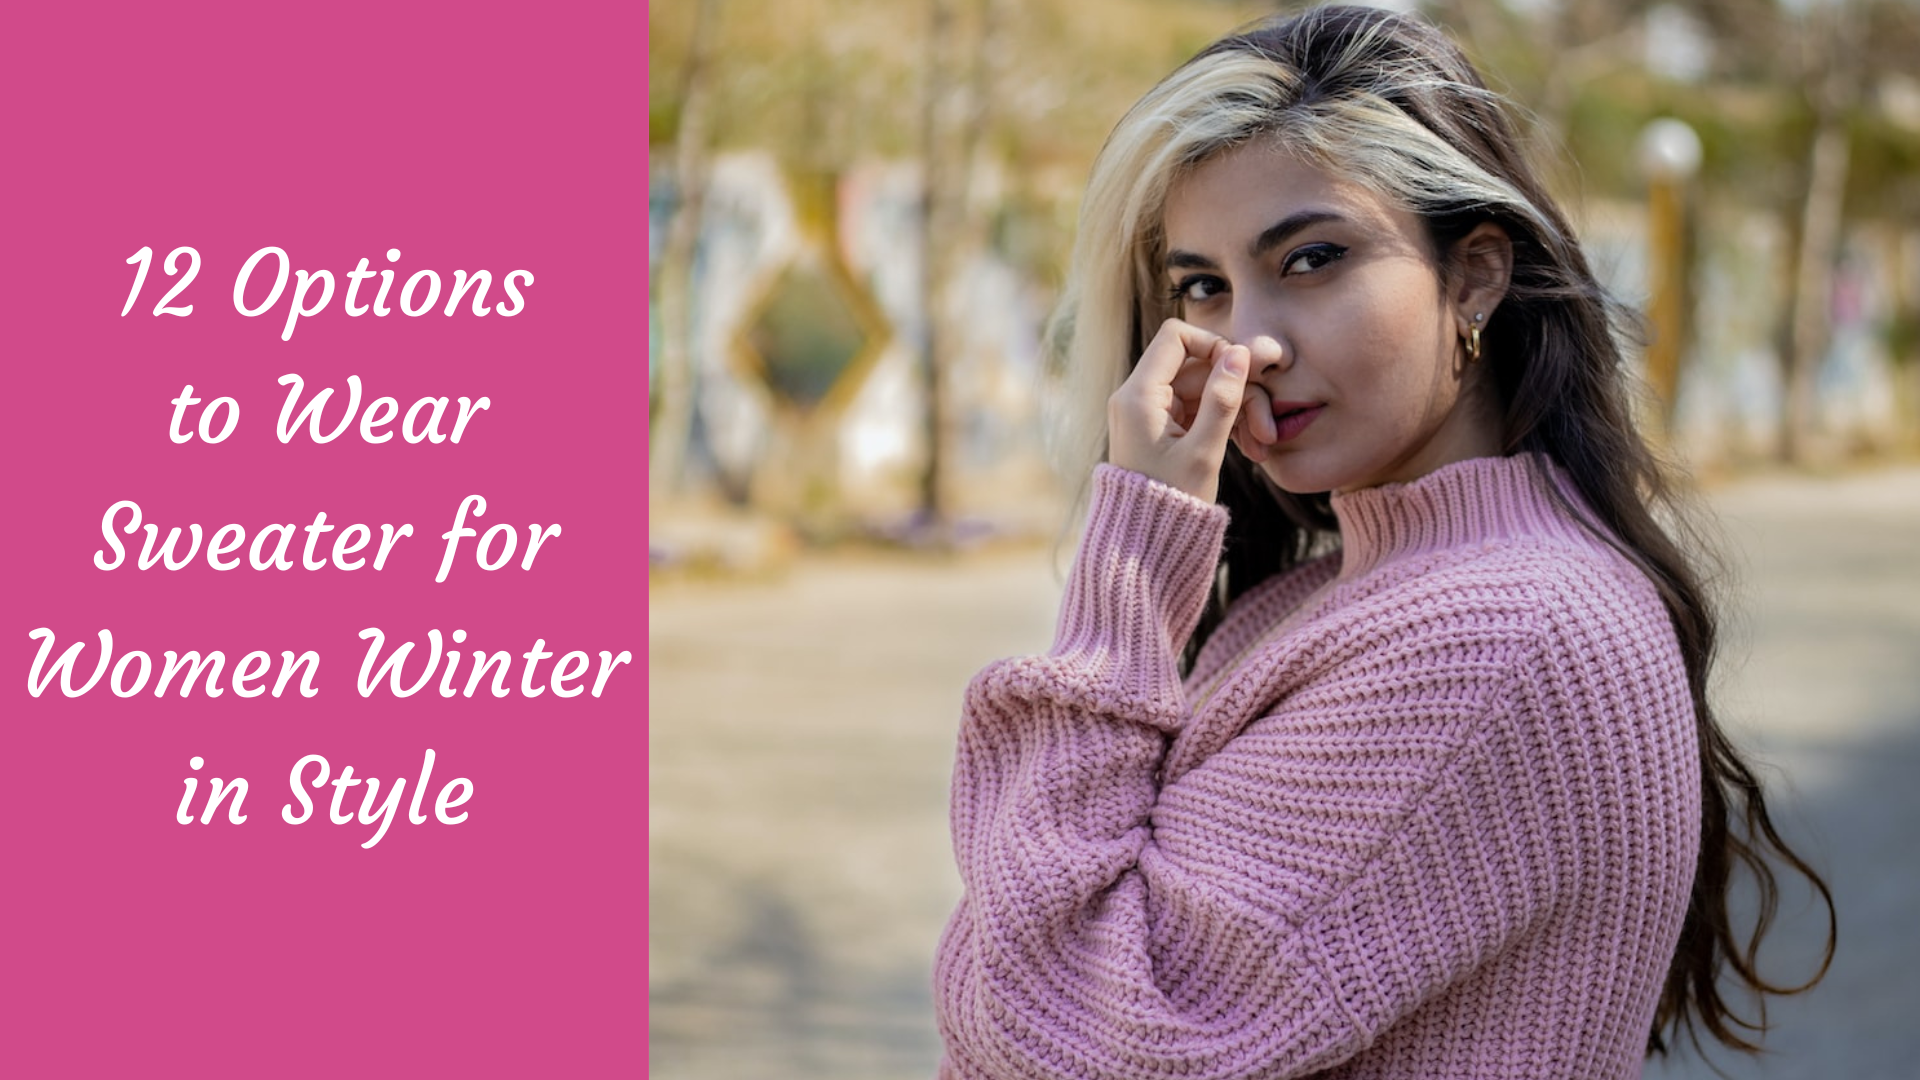 Wearing Crop Sweaters In Winter: YES Or NO? - The Fashion Tag Blog